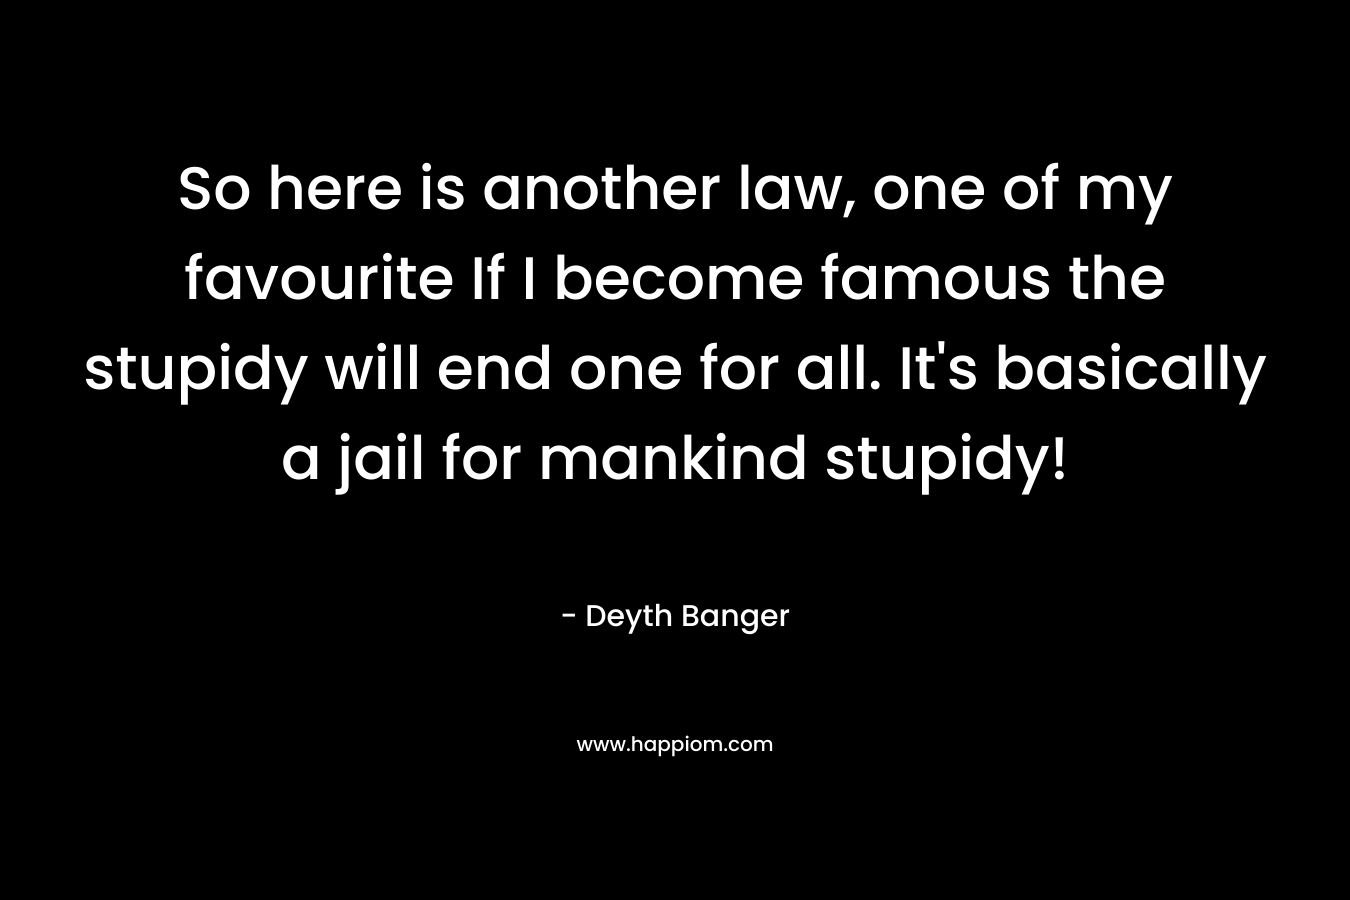 So here is another law, one of my favourite If I become famous the stupidy will end one for all. It’s basically a jail for mankind stupidy! – Deyth Banger